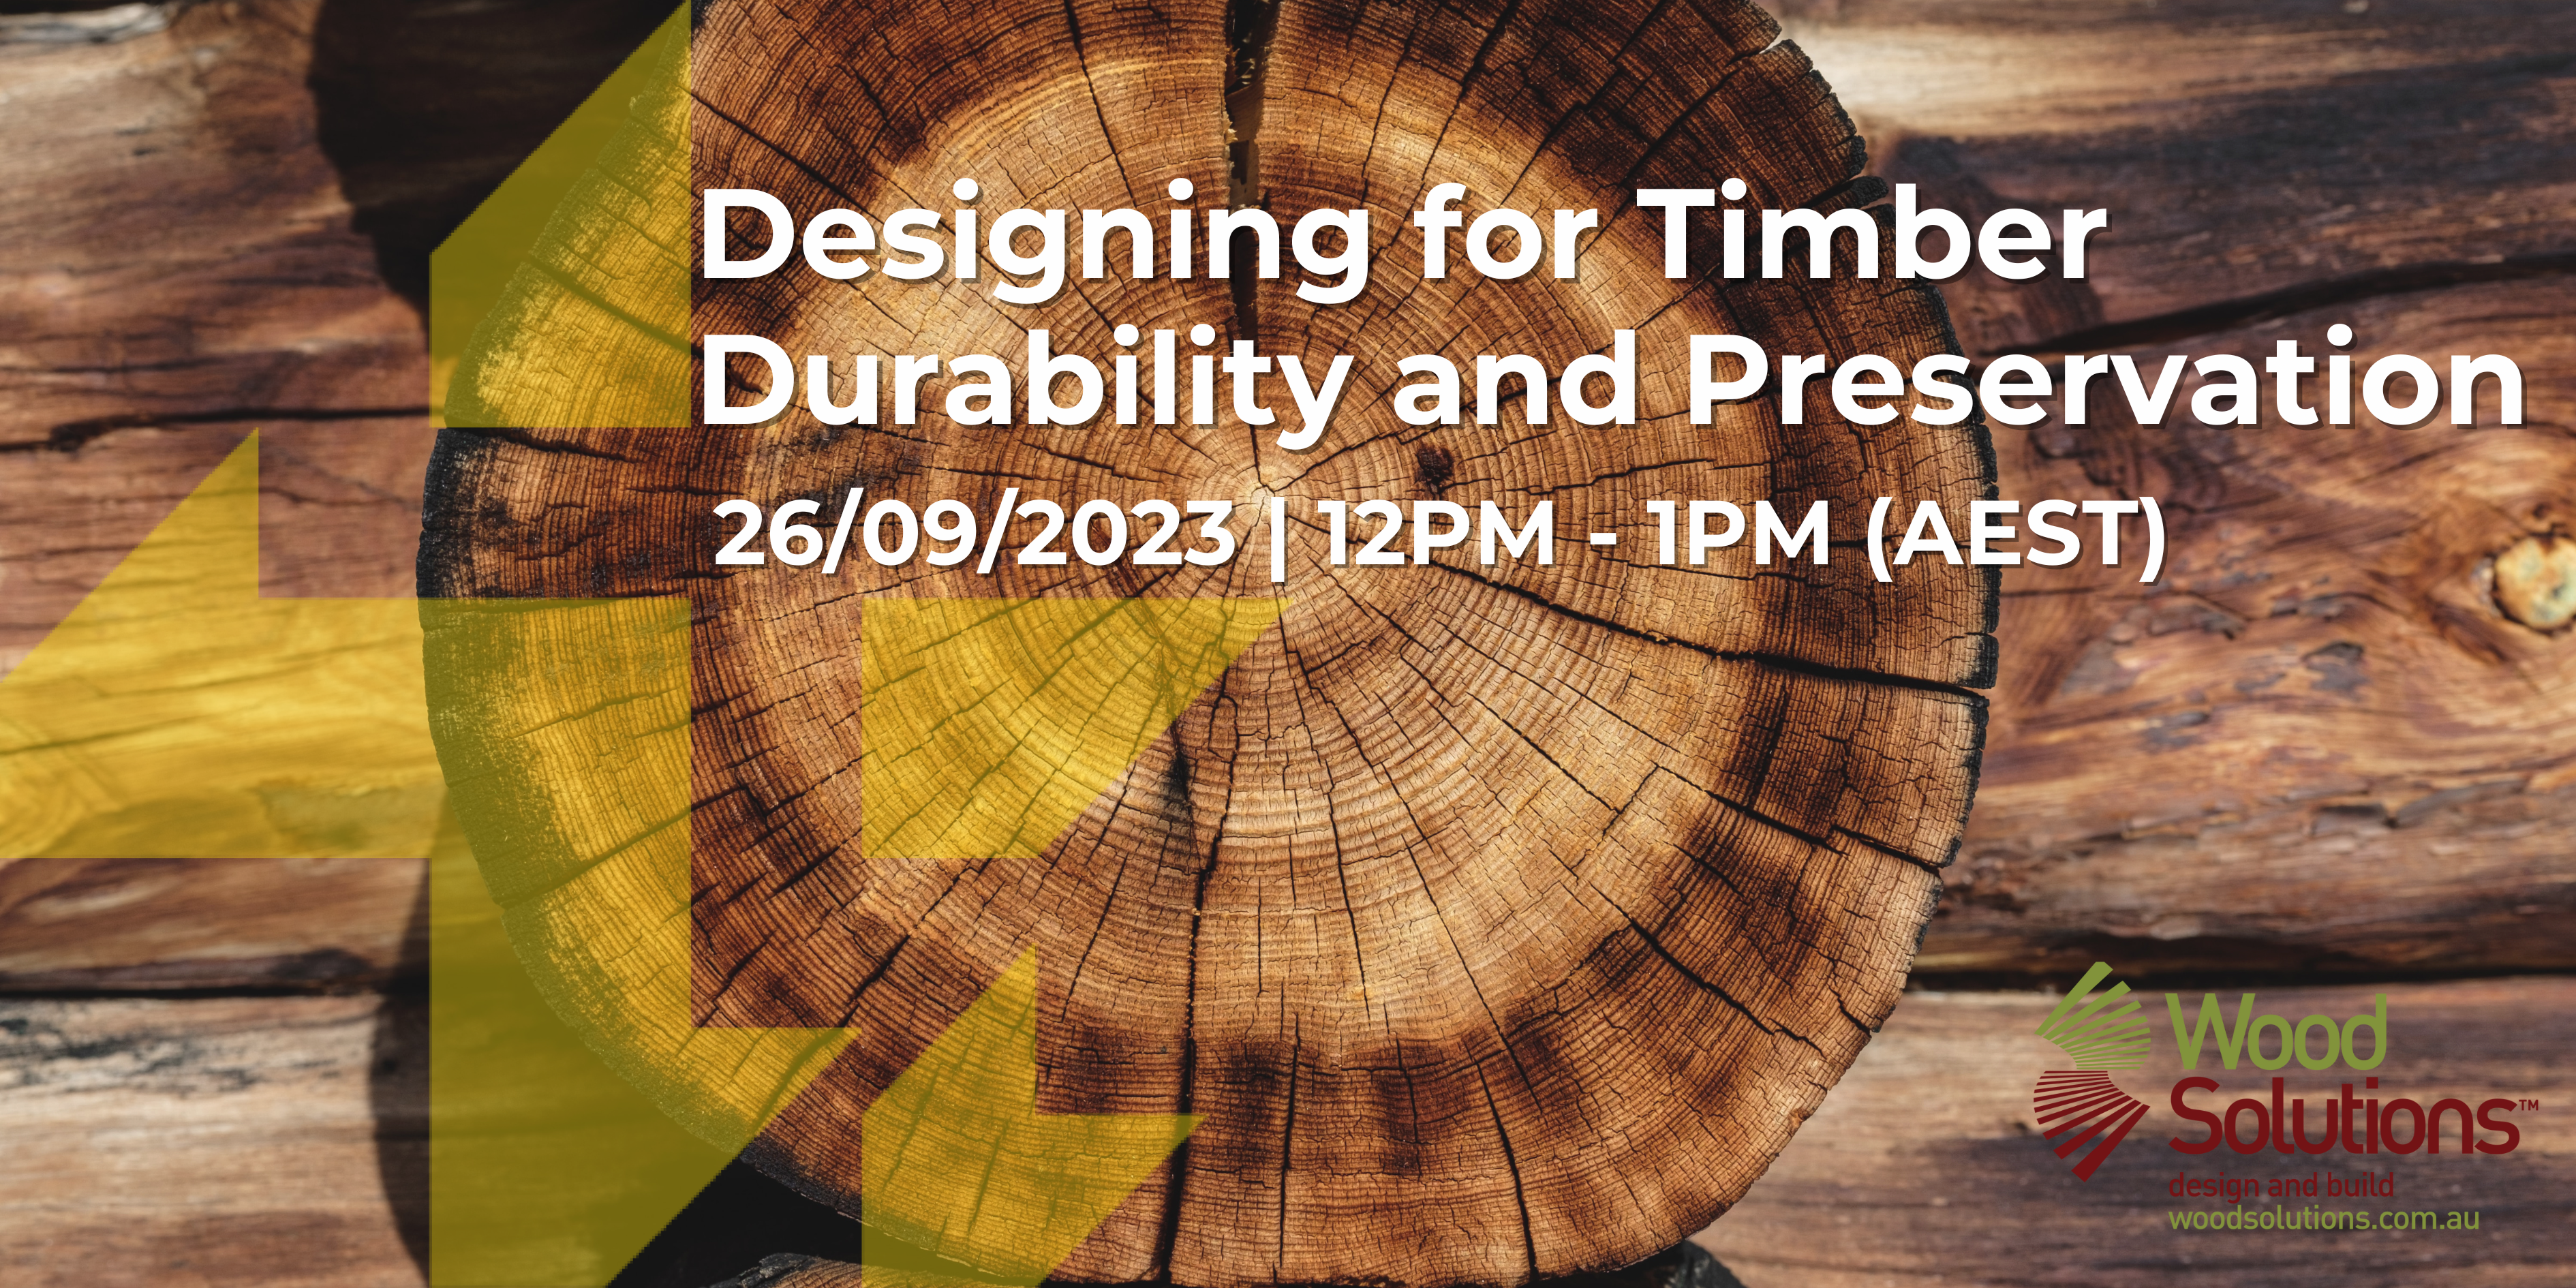 Designing for Timber Durability and Preservation